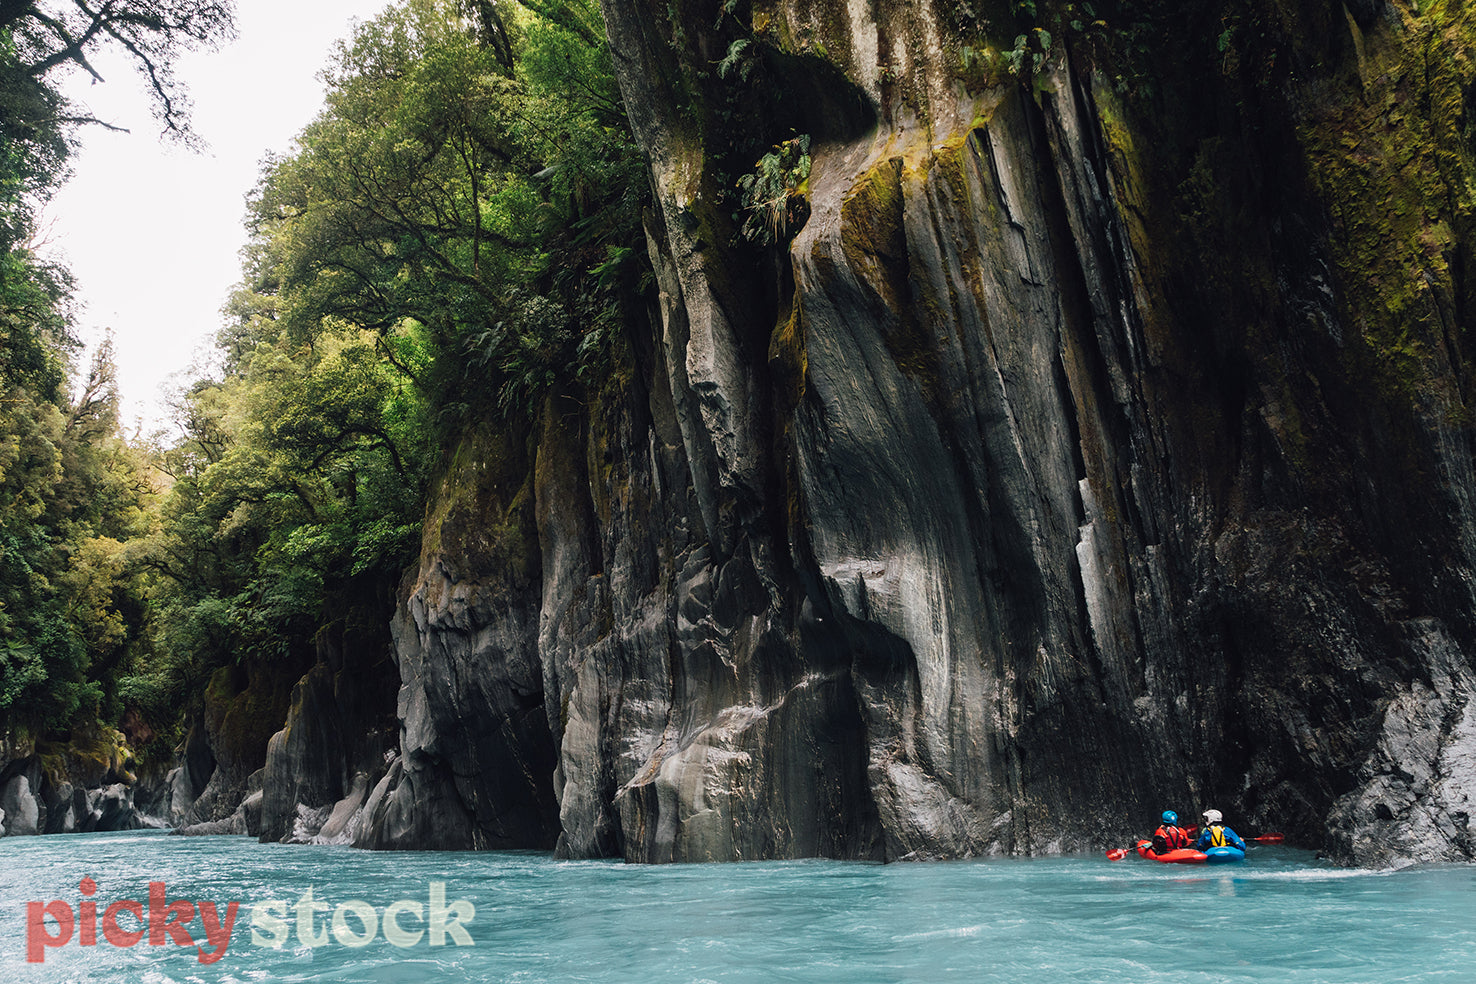 Whitewater kayakers enjoying a beautiful river gorge on a glacial river